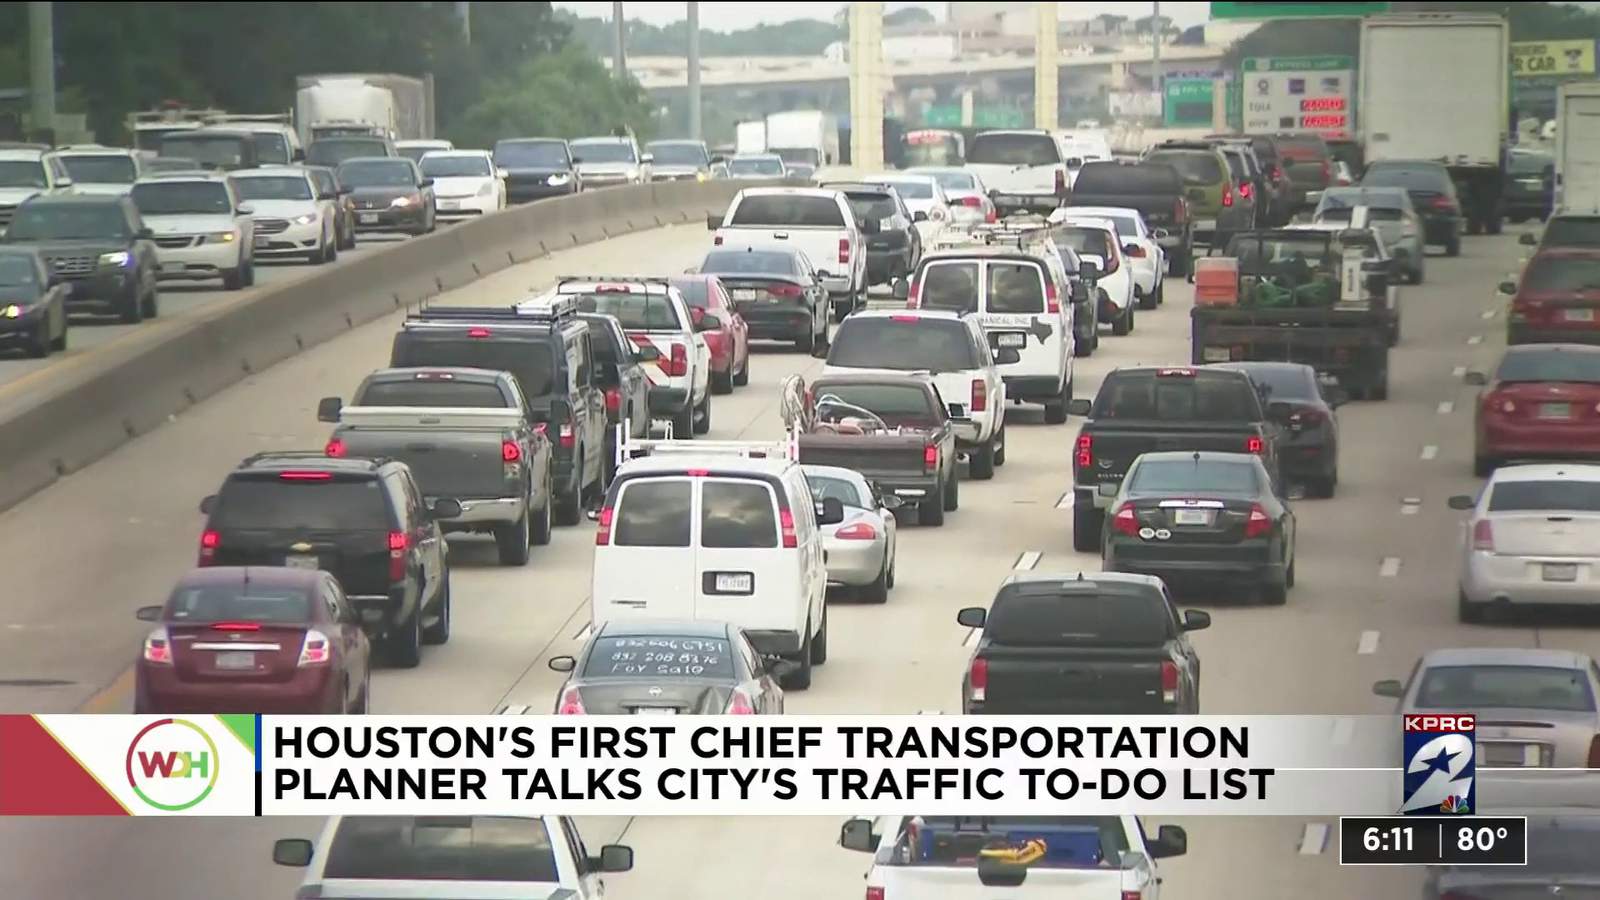 Houston’s first chief transportation planner talks city’s traffic to-do list